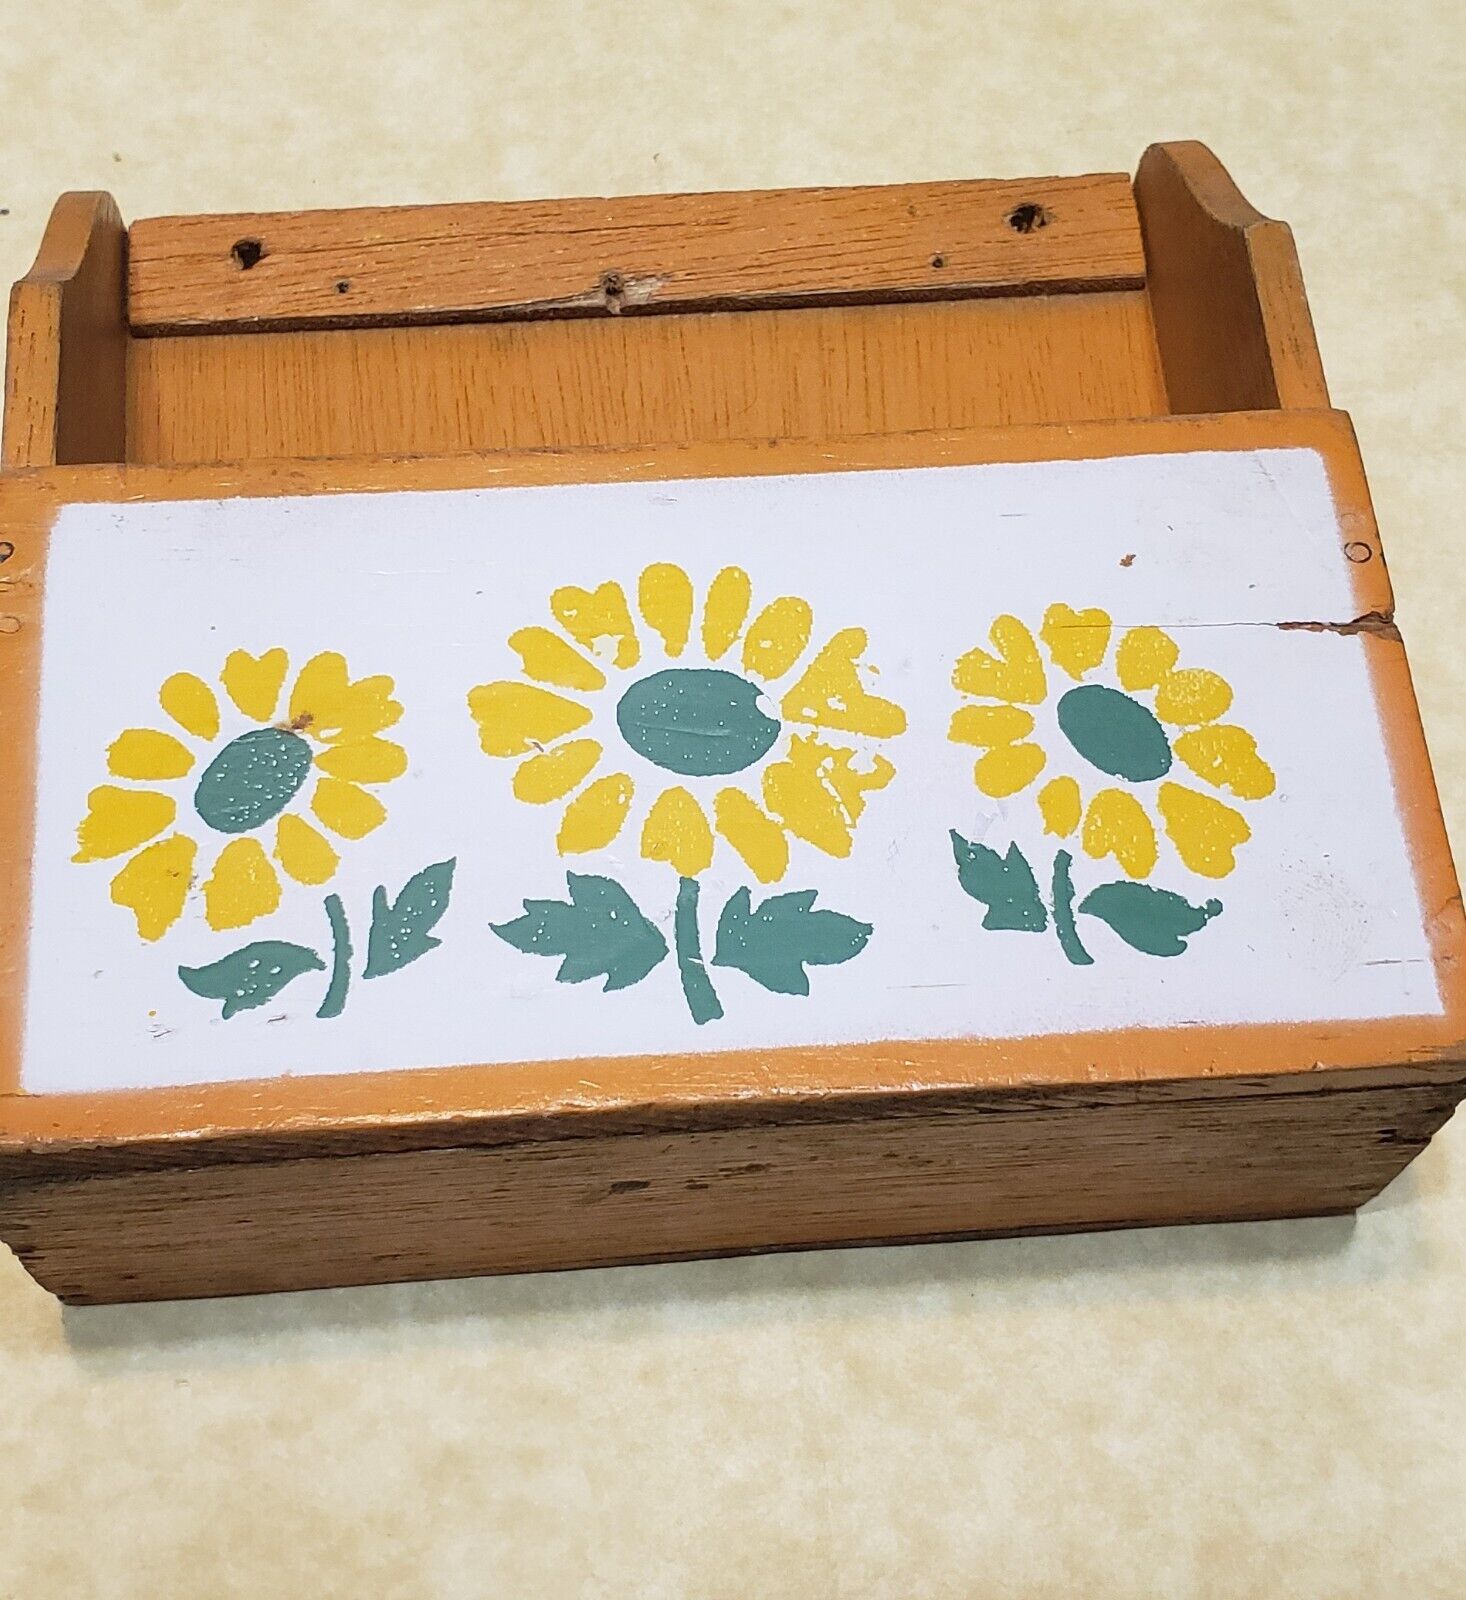 Vintage Wooden Box Wood Wall Hanging Yellow Flowers Hippy Shabby Art 5.5